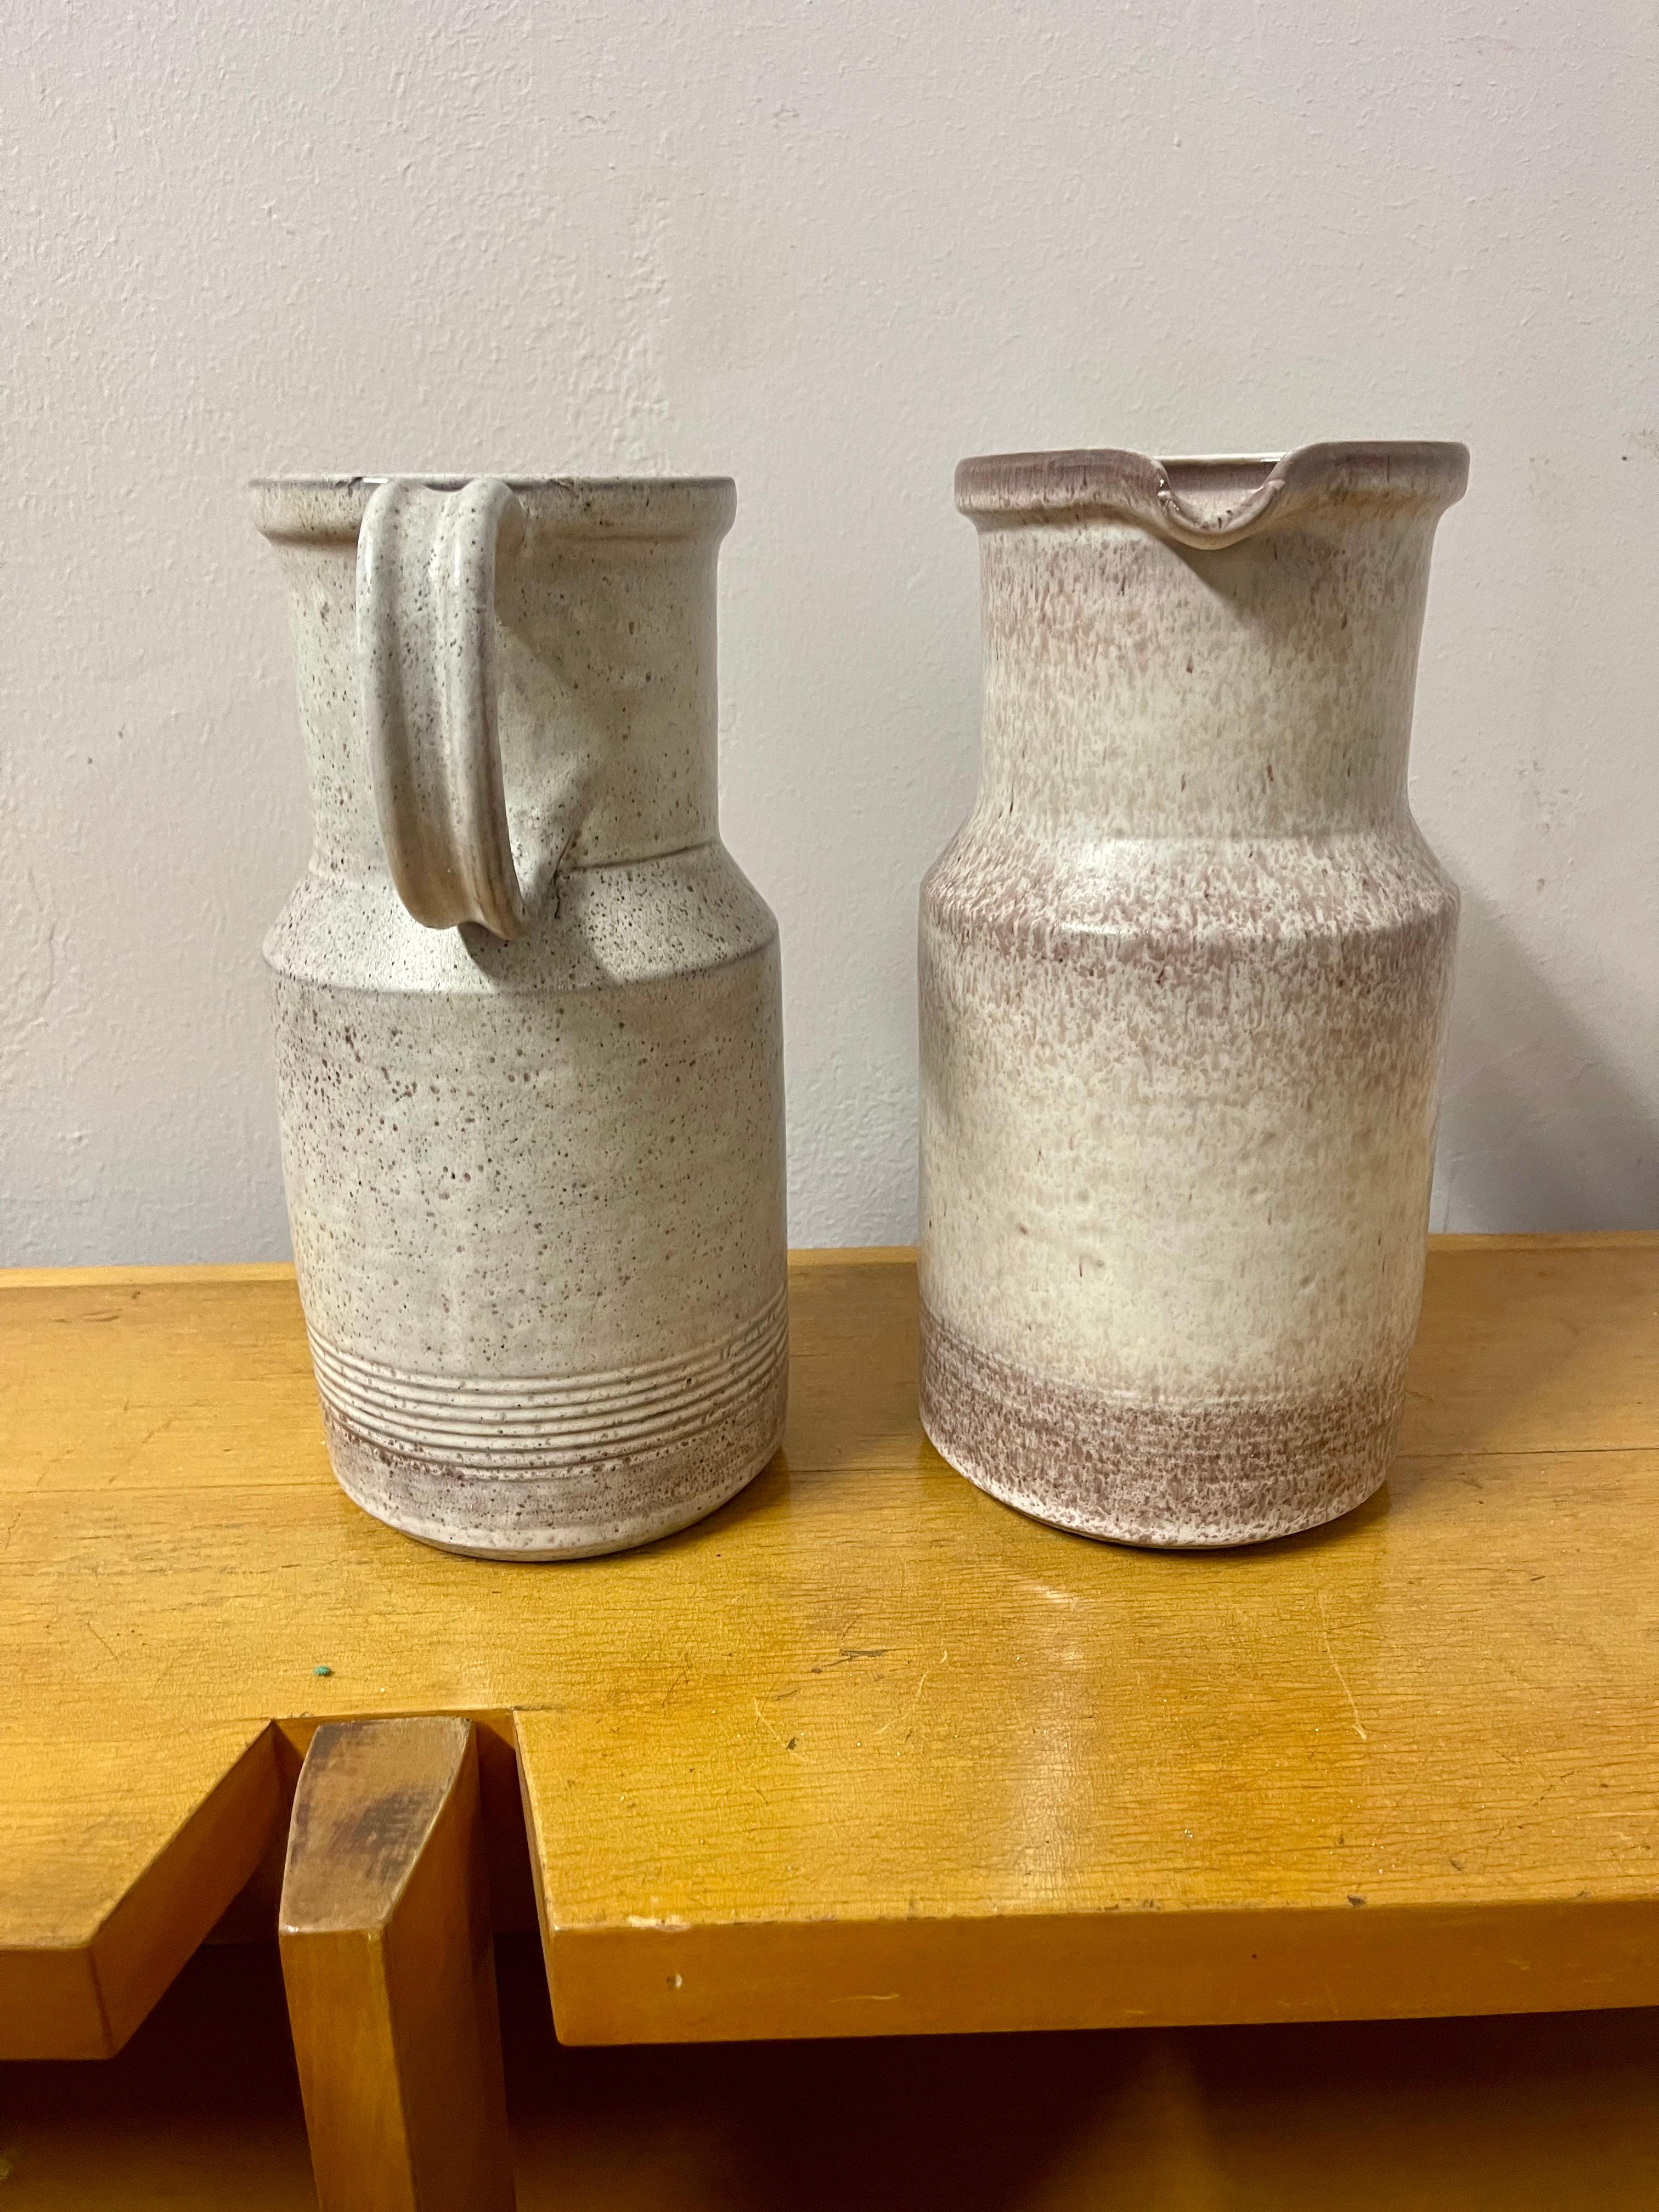 Pair of Grés ceramic table carafes from the 1970s collection of Italian ceramist and designer Alessio Tasca (Nove 1929 - Heilbronn 2020).
